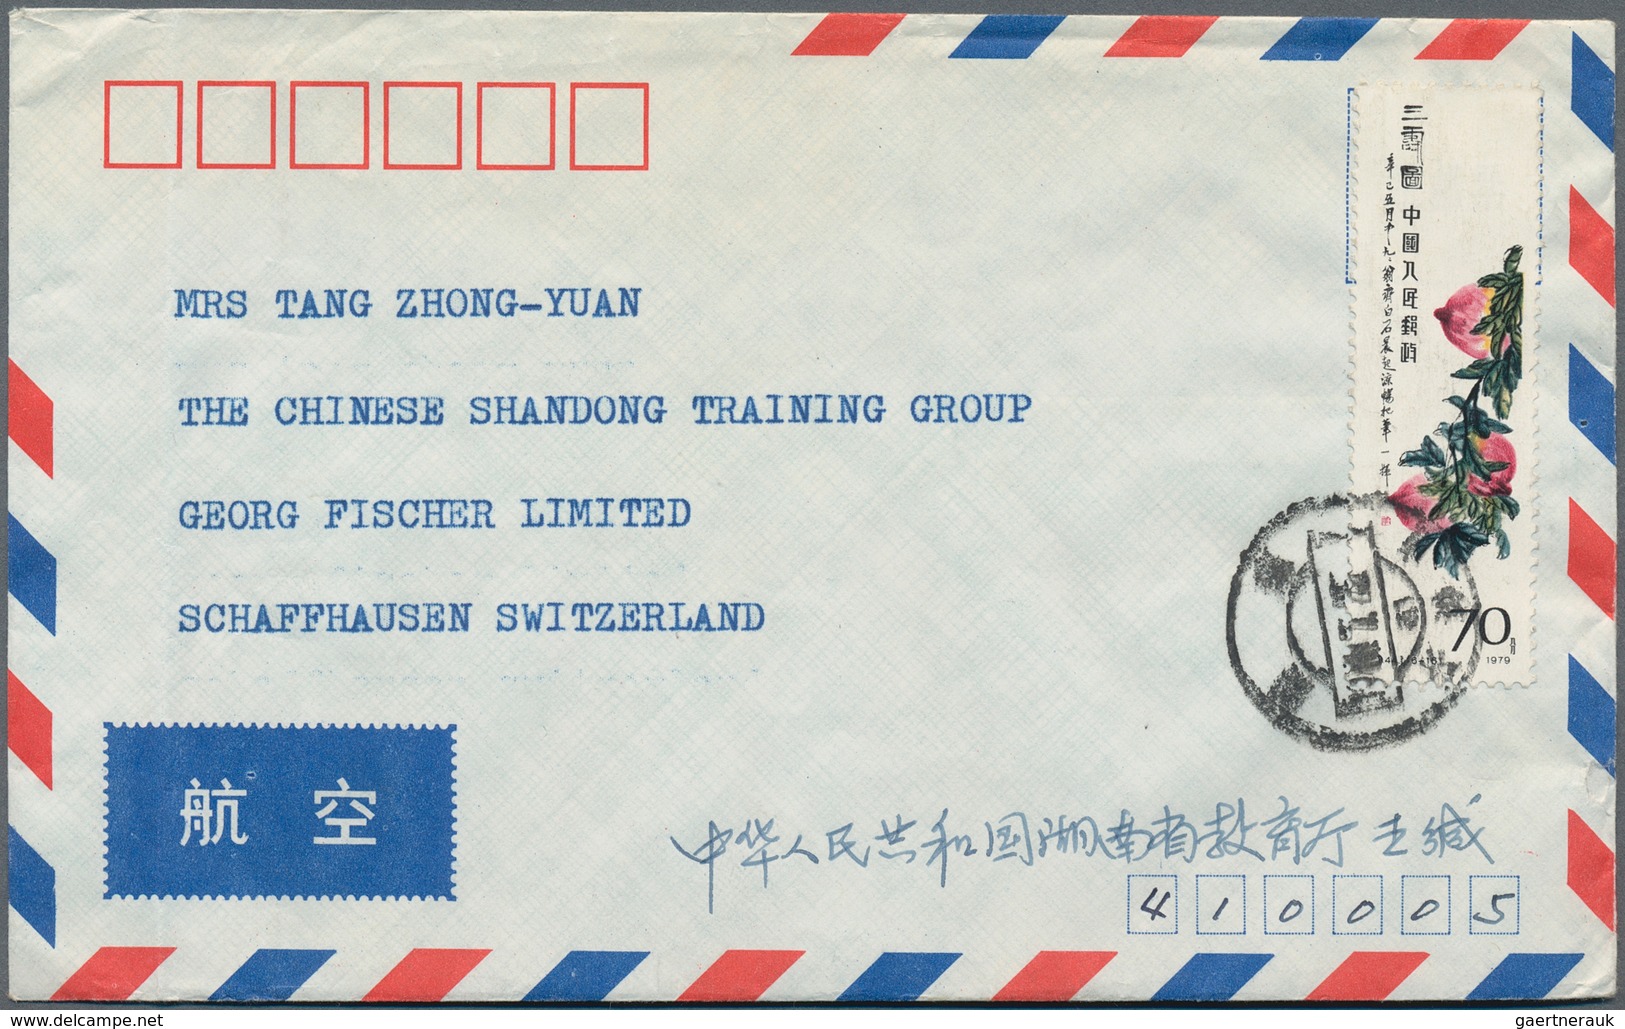 China - Volksrepublik: 1969/95, covers/FDC/ppc and used stationery, appr. 330 items mostly used inla